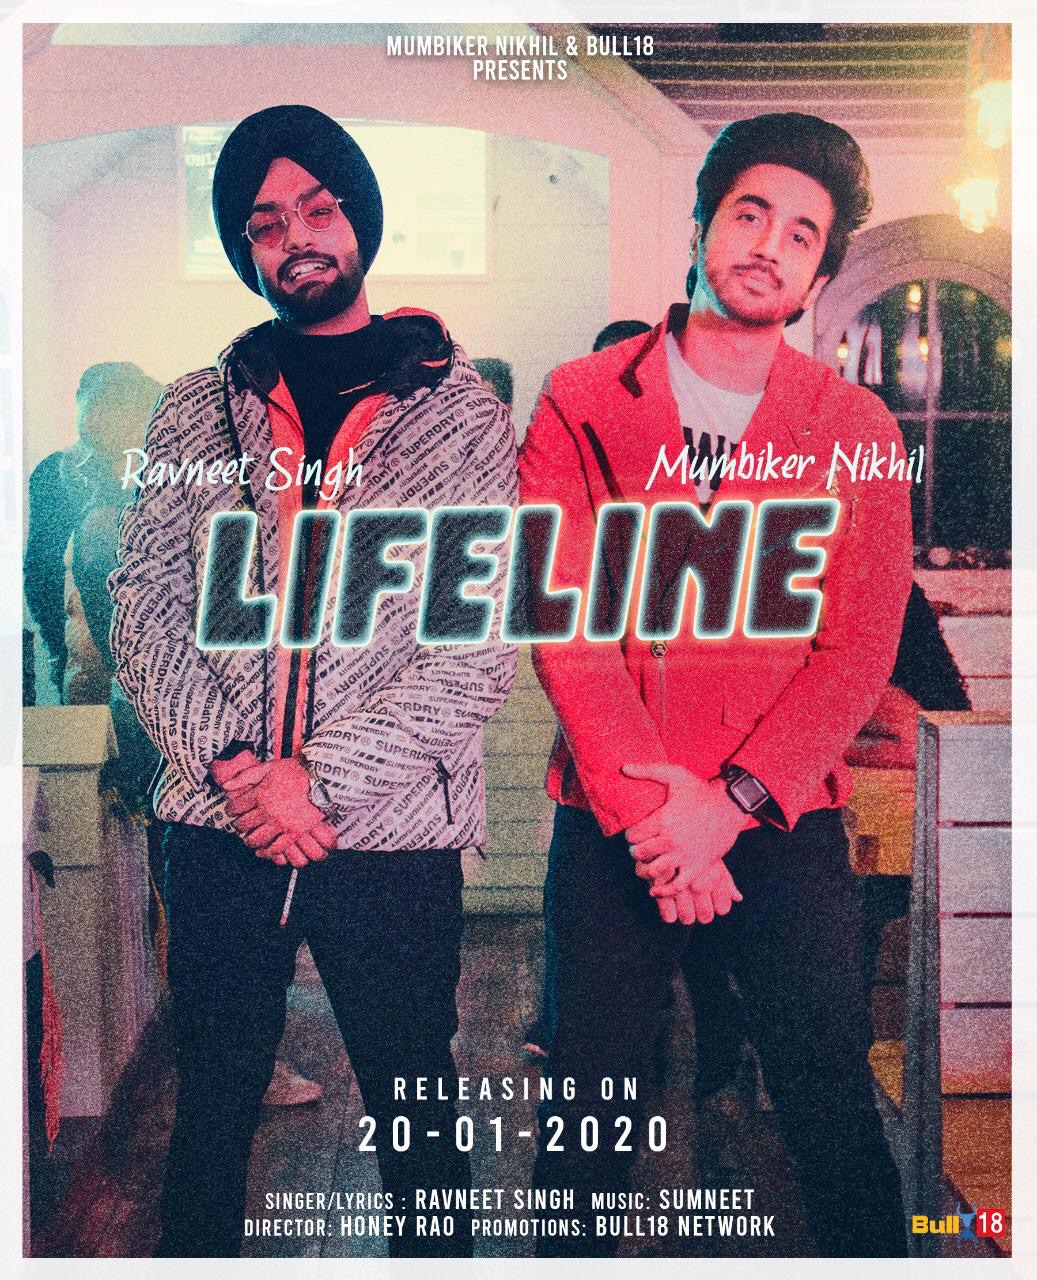 To lit the hearts, Ravneet and Mumbiker Nikhil coming up with their romantic song Lifeline